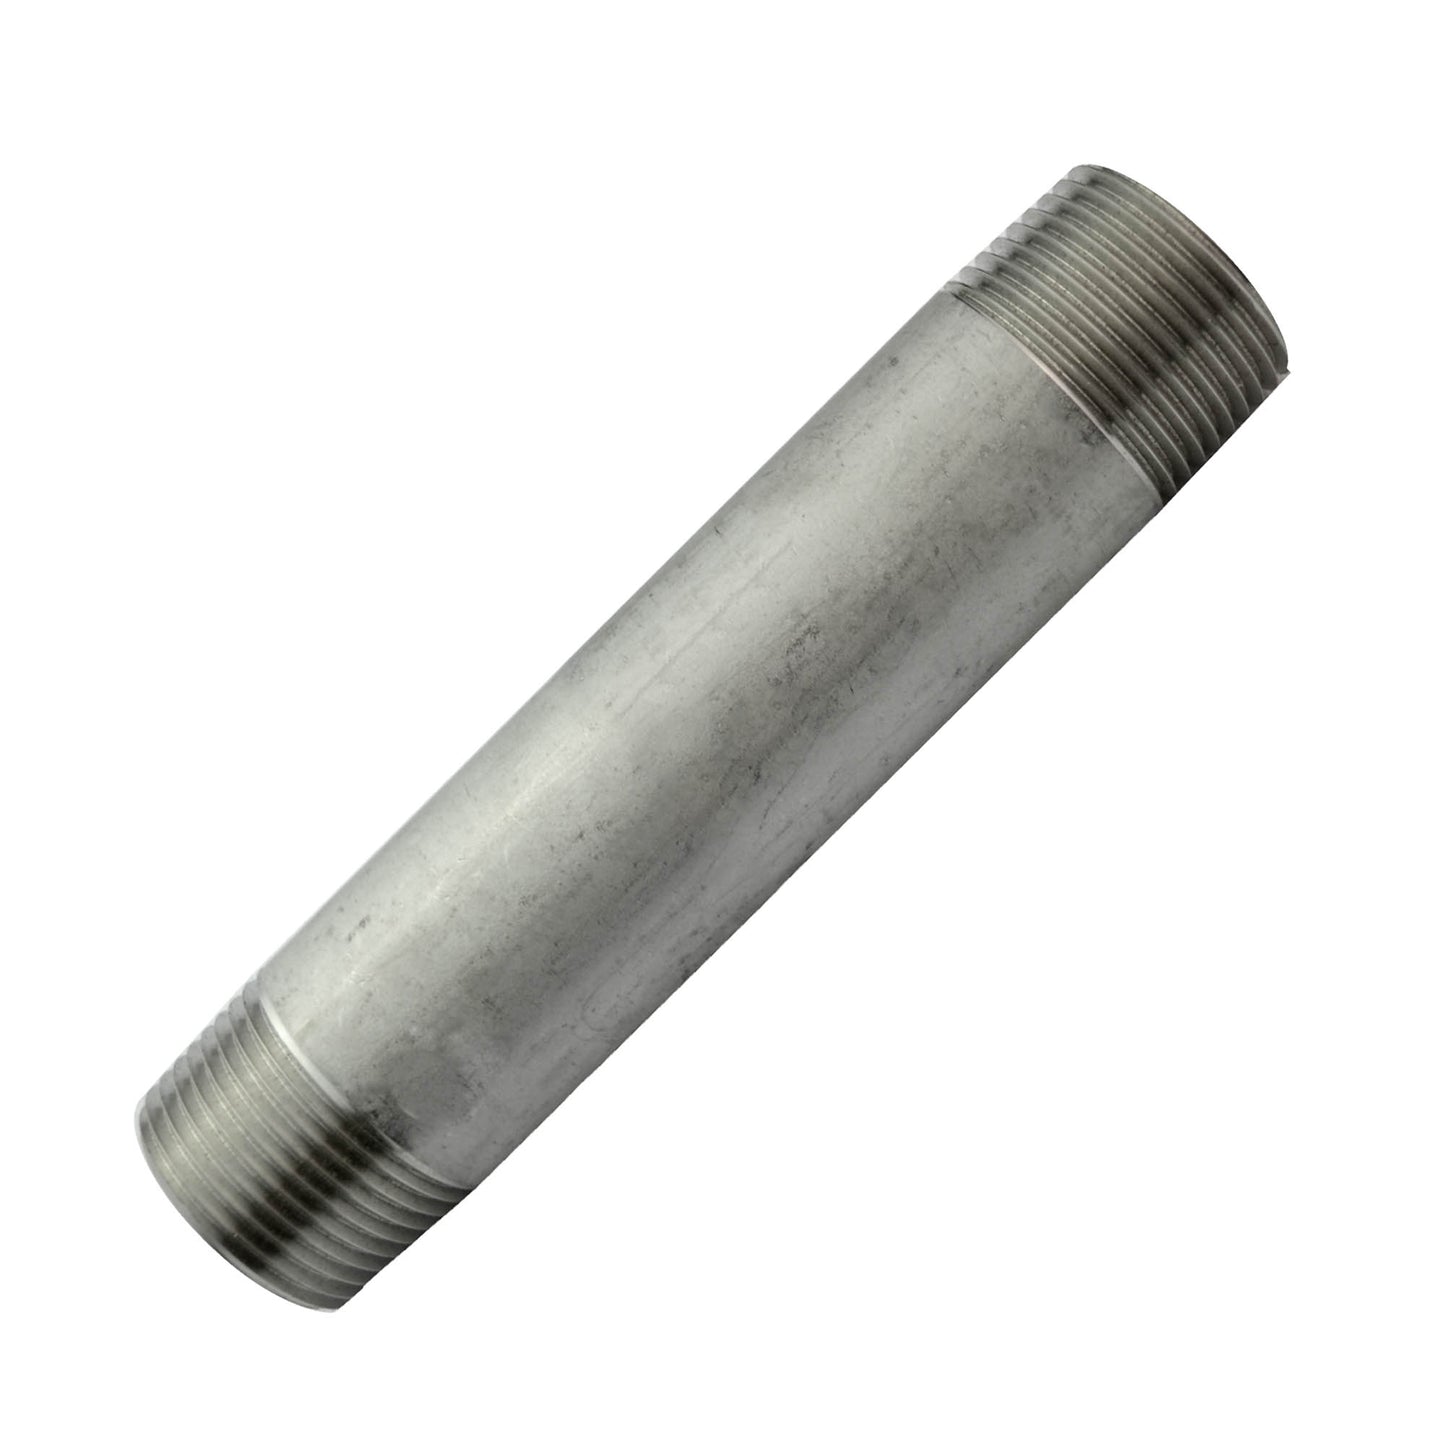 3/4" 6" Long Nipple - Stainless Steel Fitting